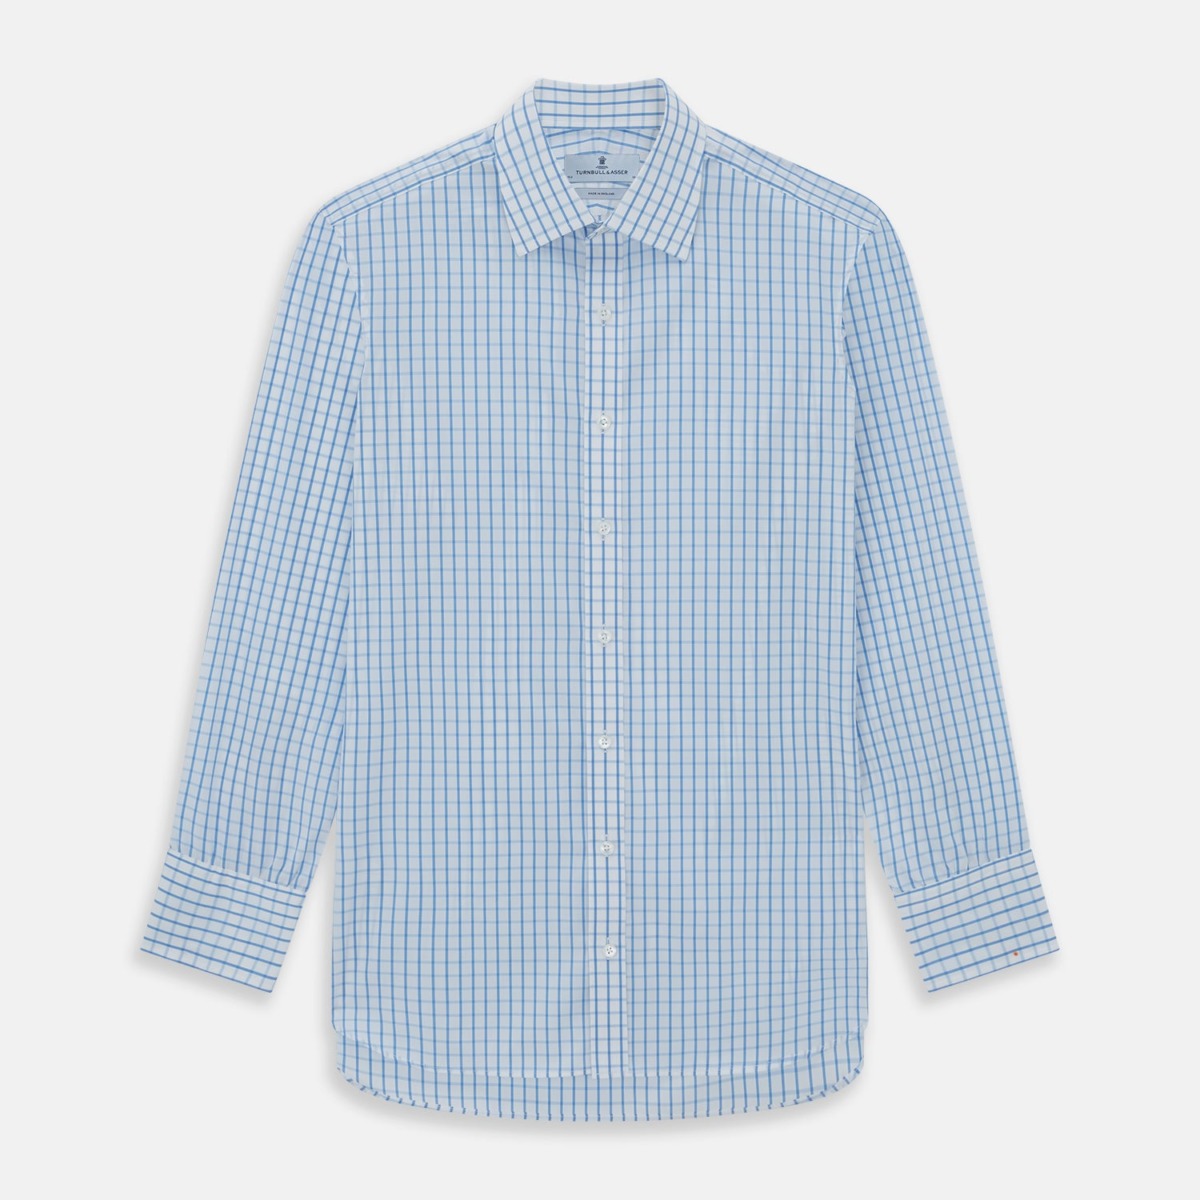 Gents Shirt - Checked - Turnbull And Asser GOOFASH